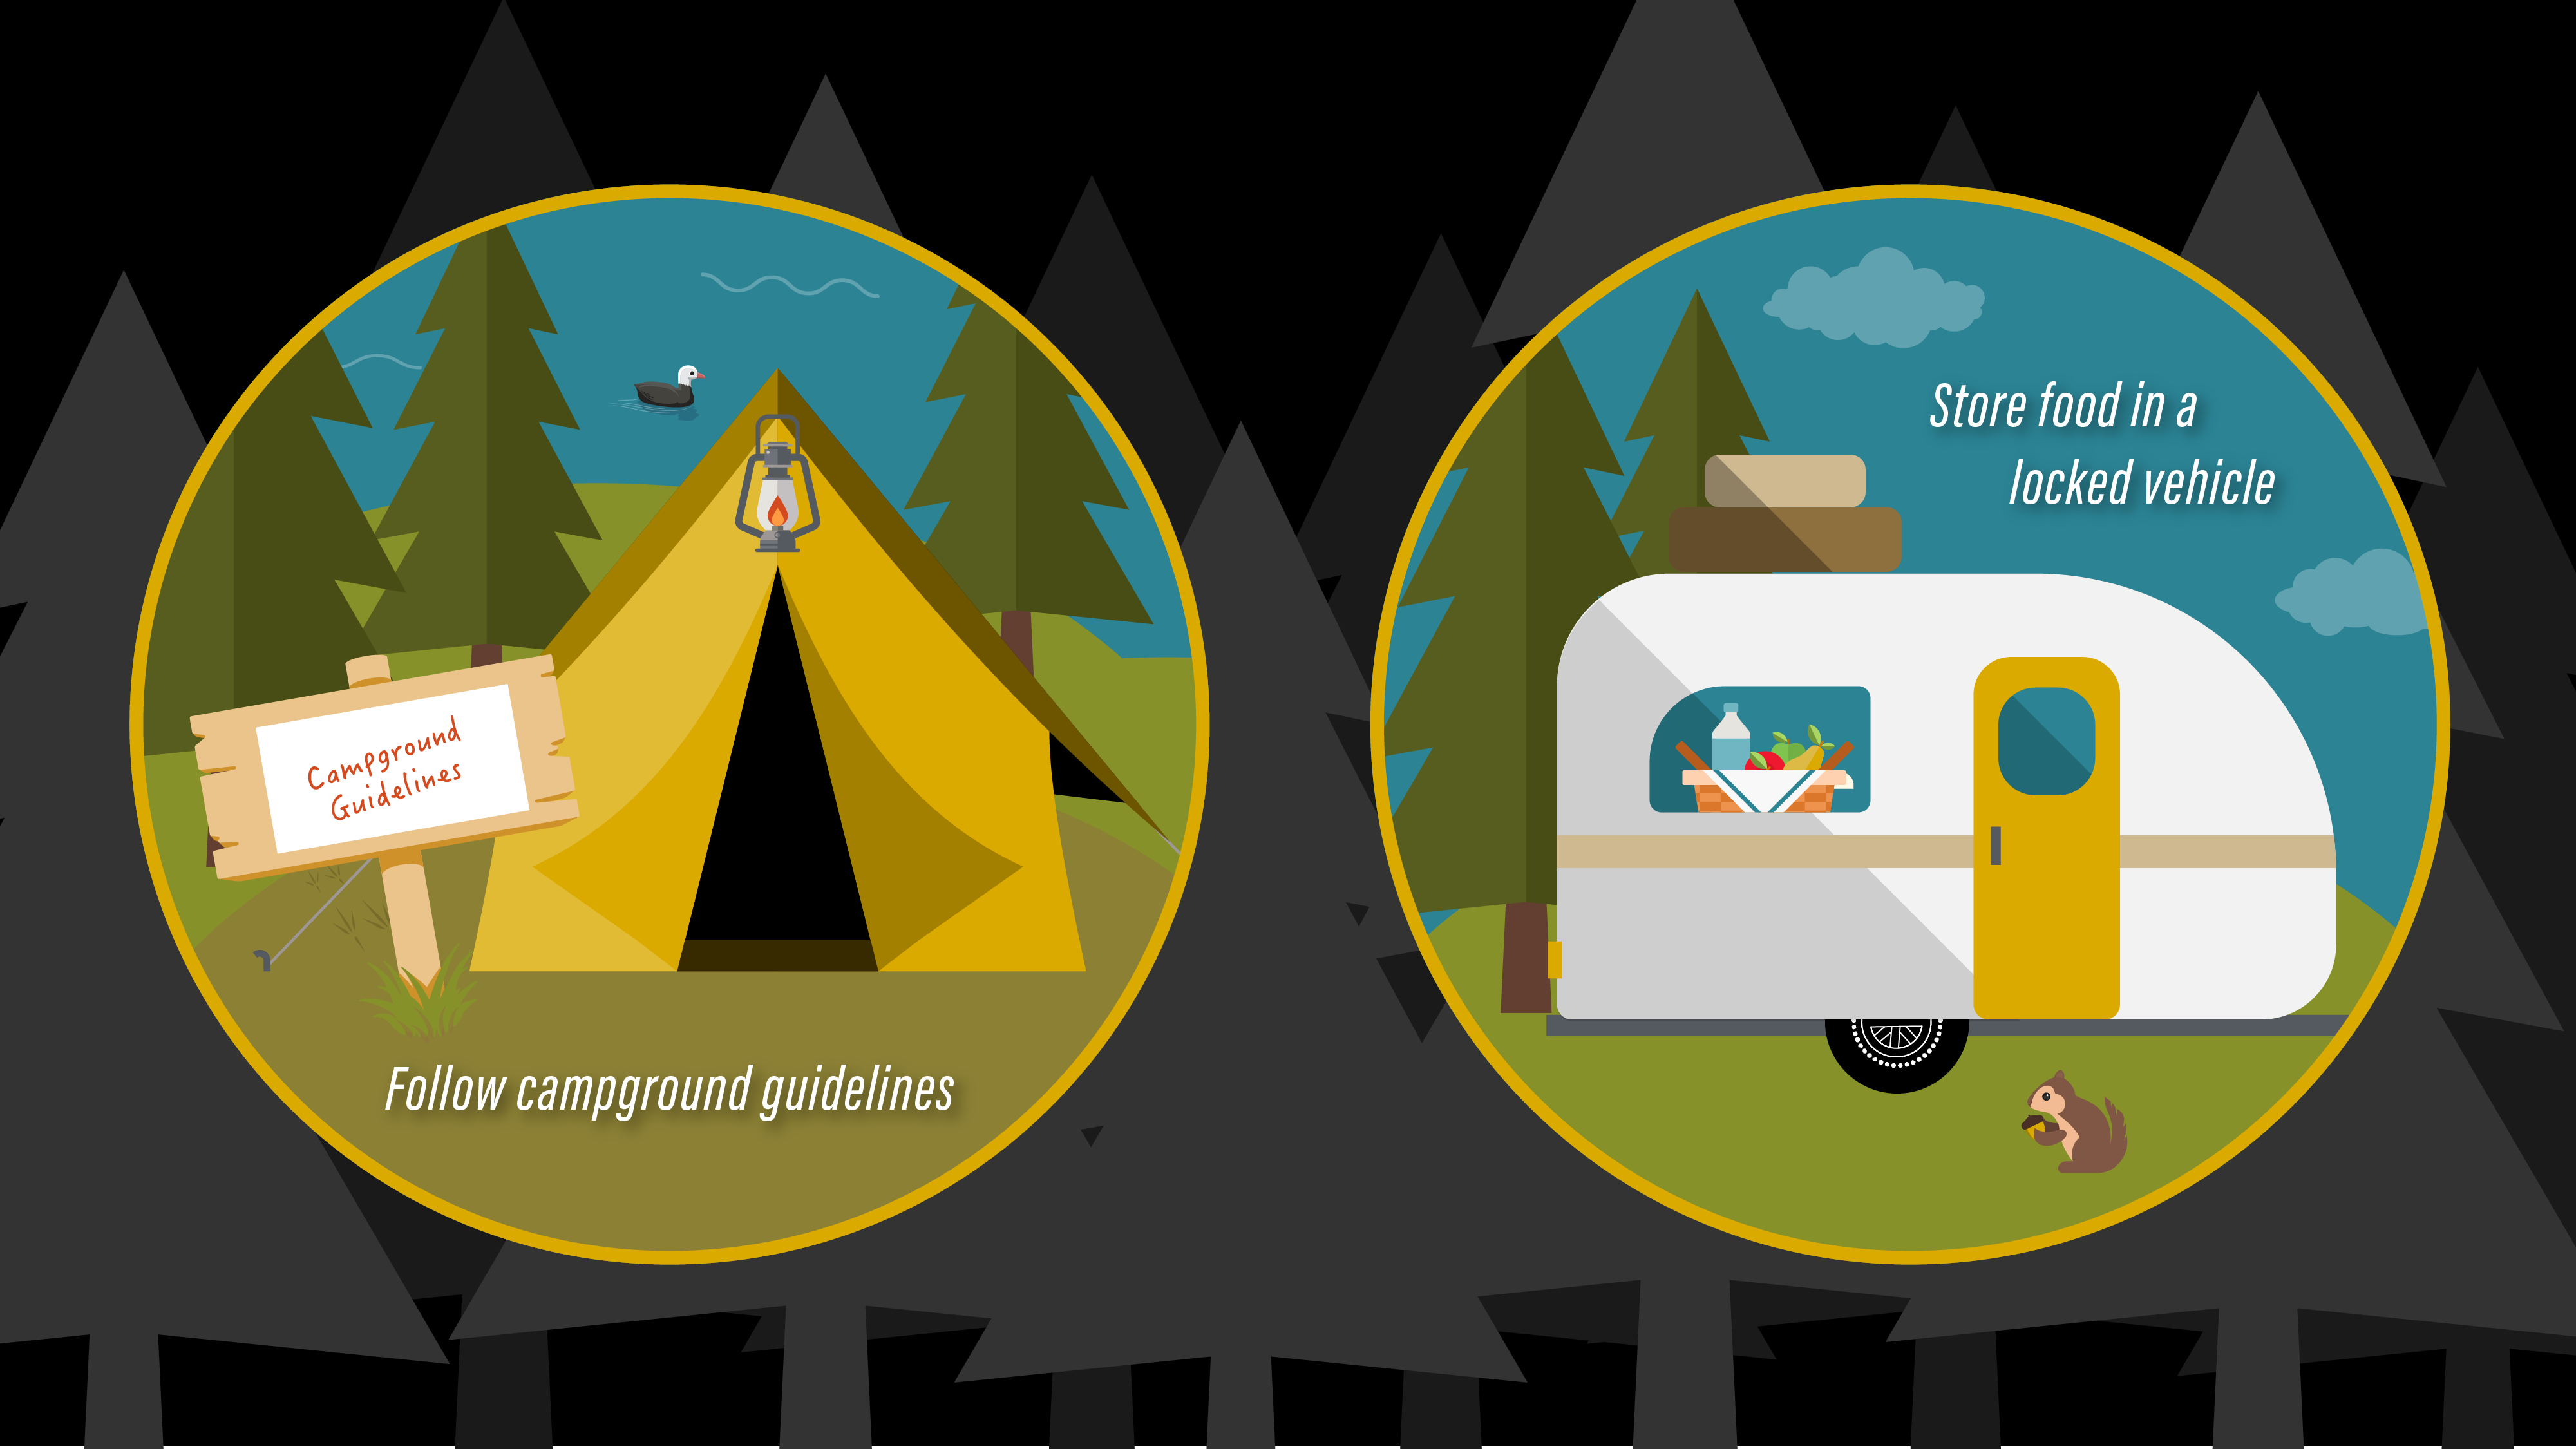 Follow campground guidelines; store food in a locked vehicle